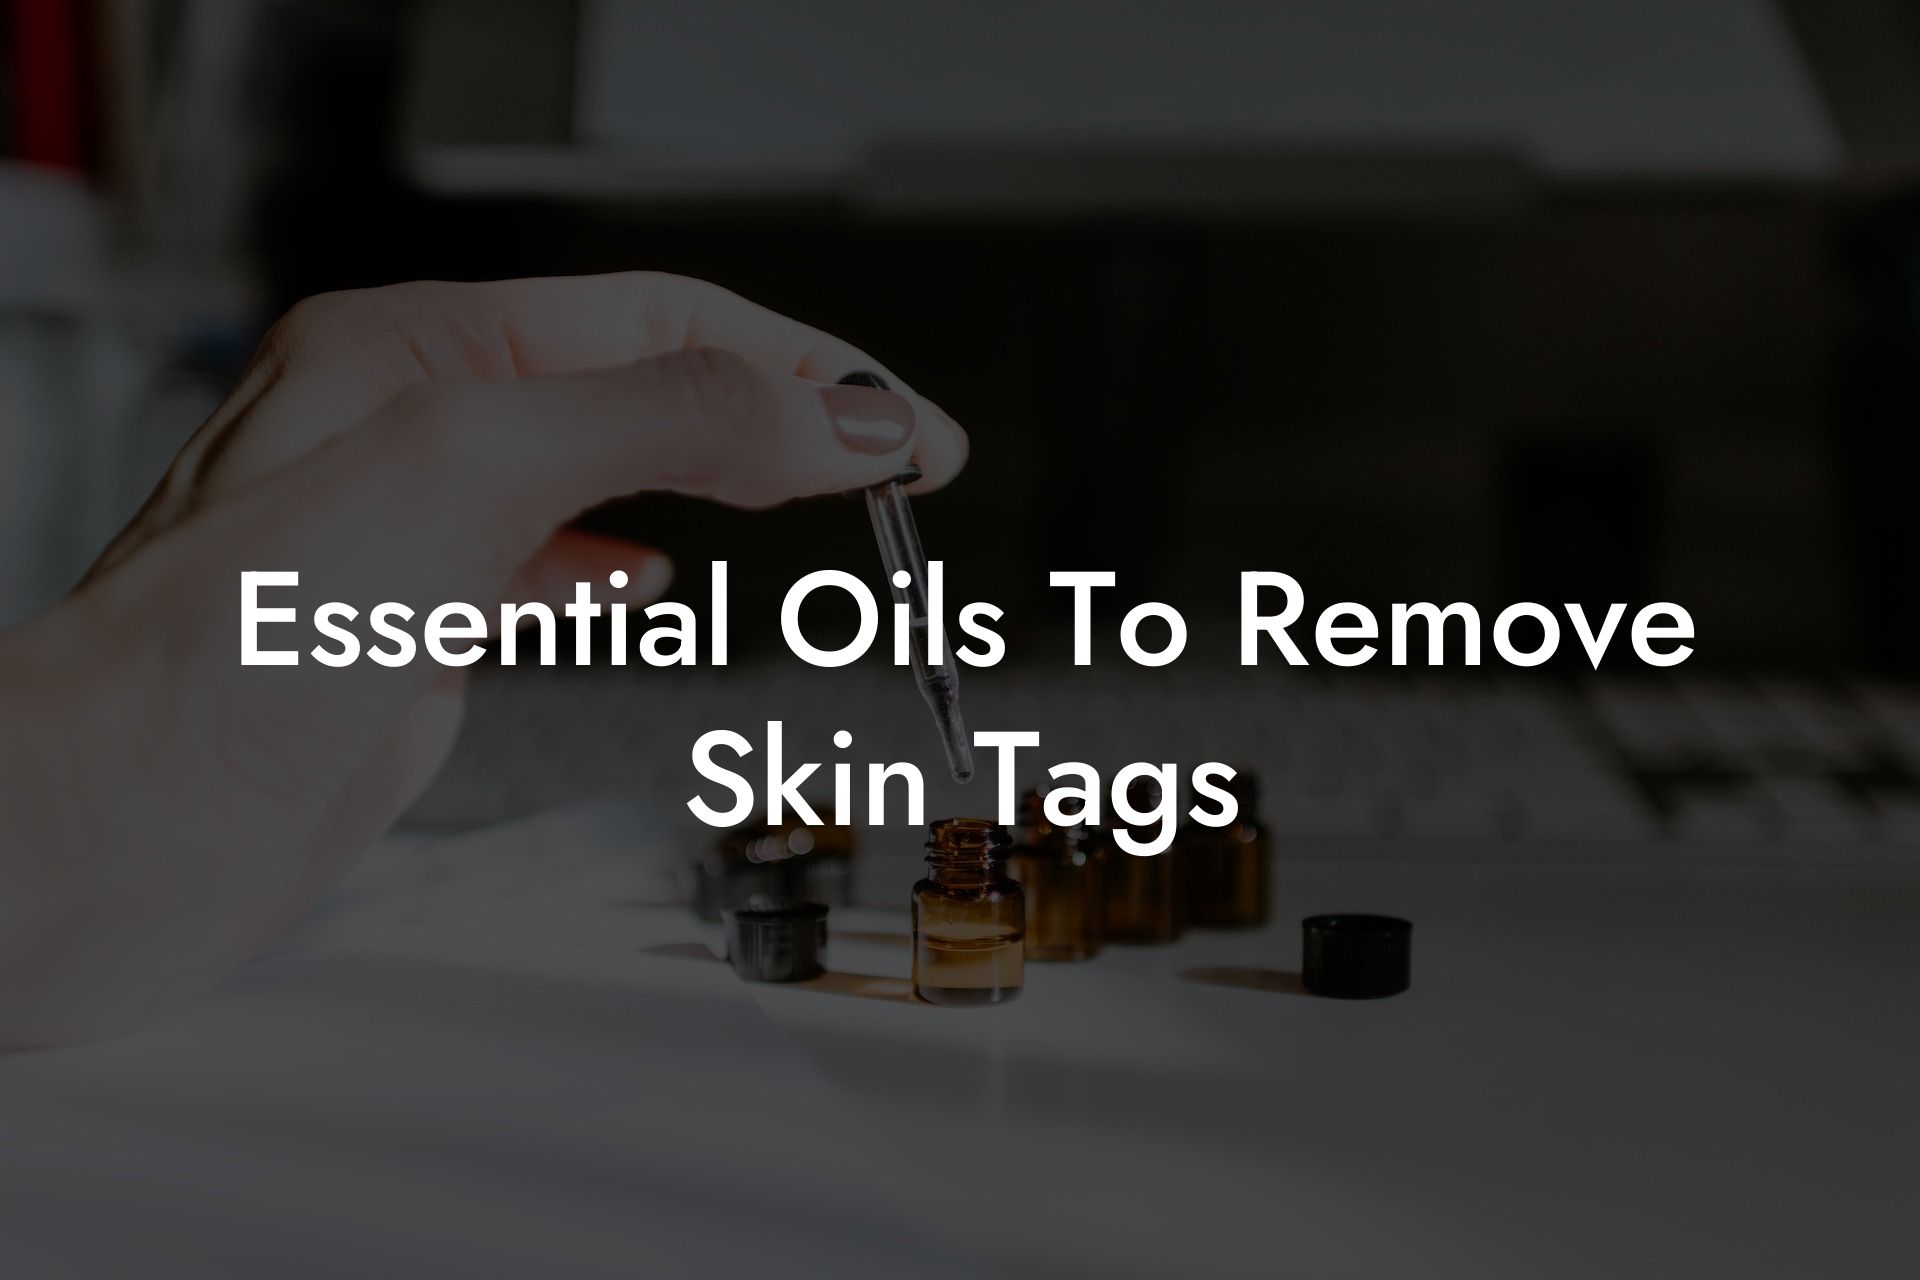 Essential Oils To Remove Skin Tags